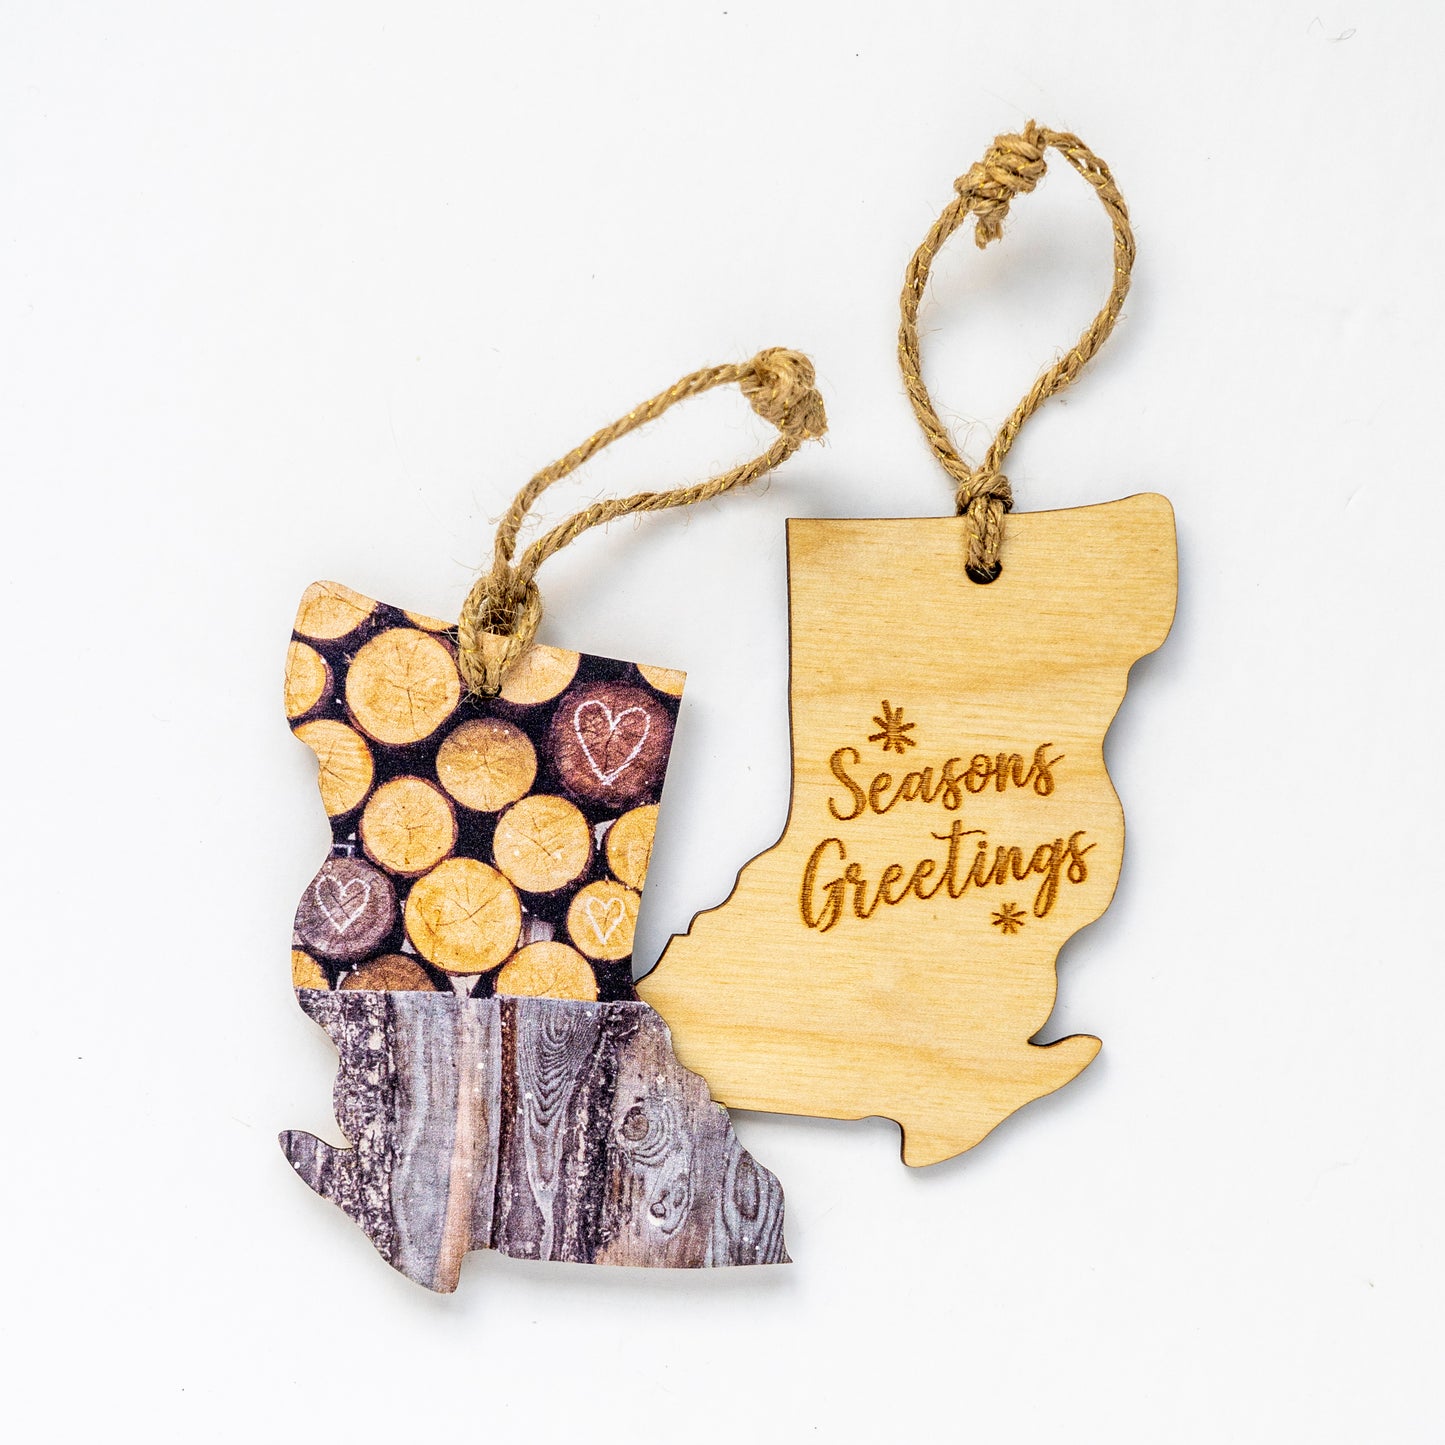 British Columbia Wooden Holiday Ornament <br> Seasons Greetings <br>Rustic Woodpile with Hearts